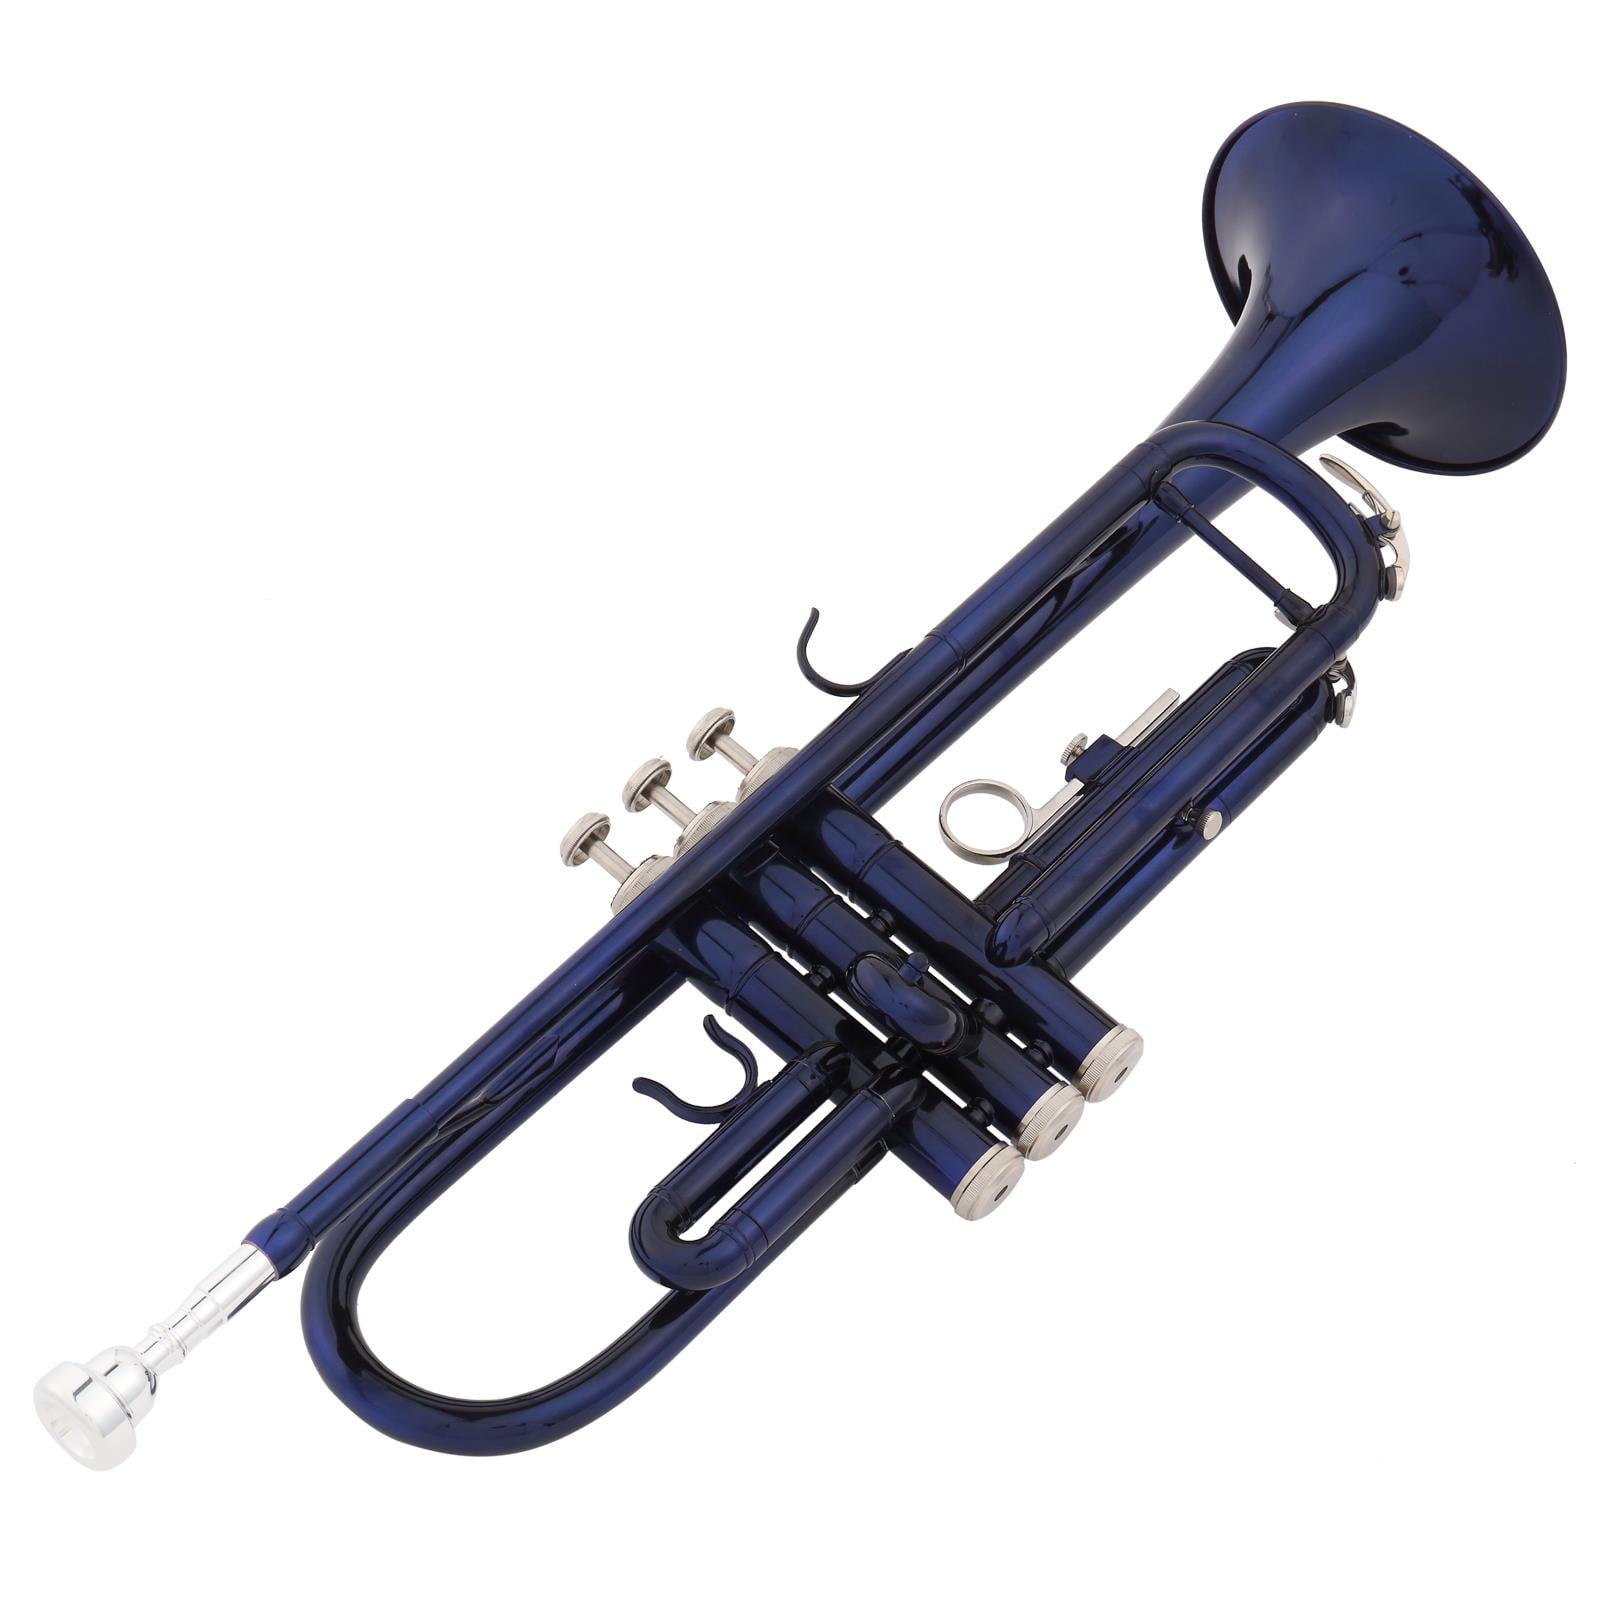 Blue trumpet with case and mouthpiece